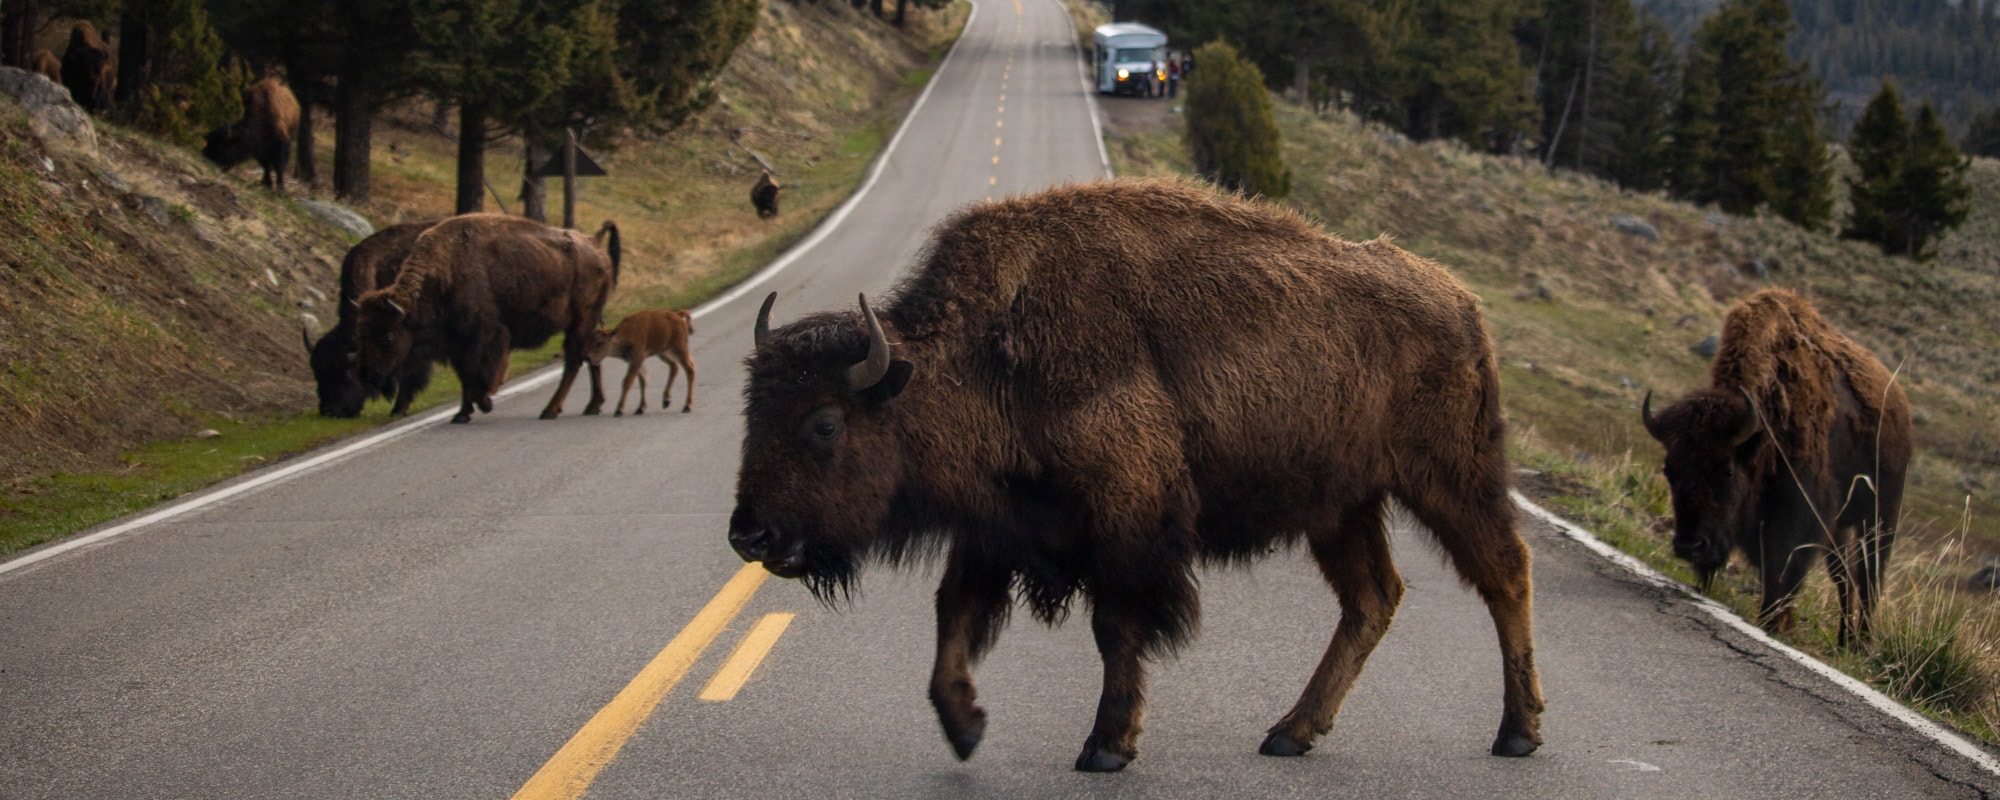 Bison crossing road at Tower-Roosevelt, Yellowstone National Park